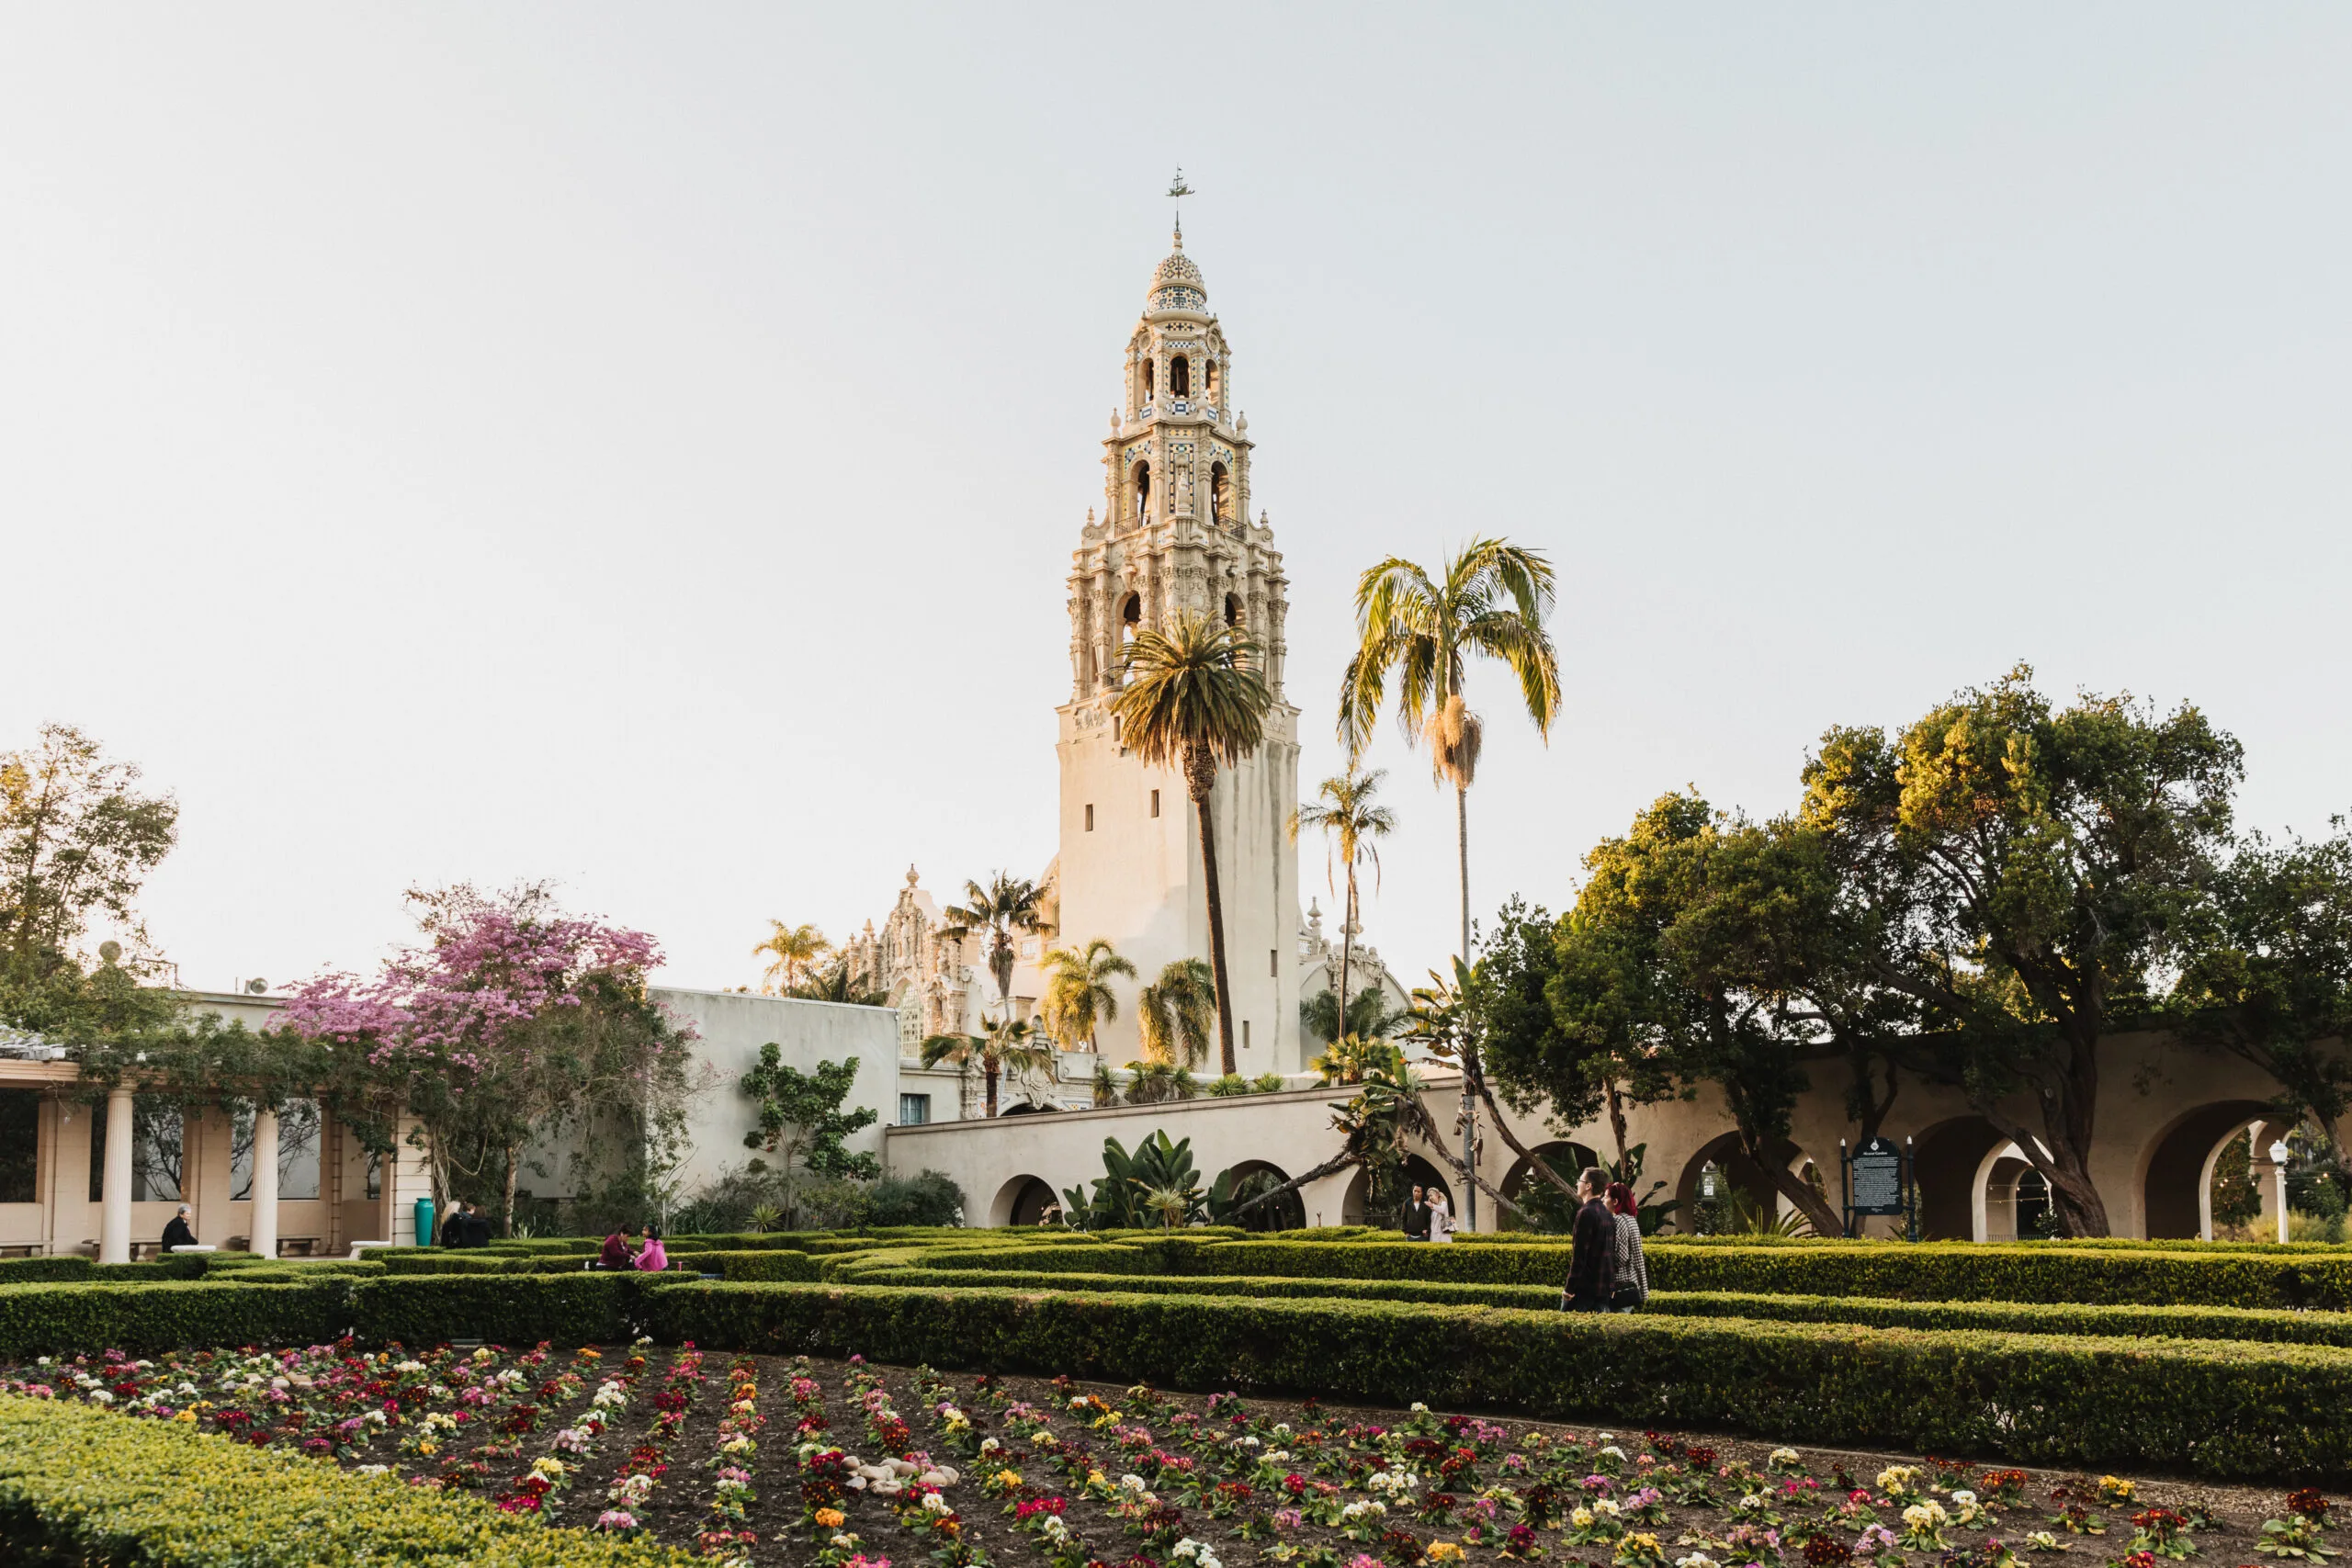 Alcazar garden with rows of flowers and trimmed bushes in the foreground and the California Tower in the background.